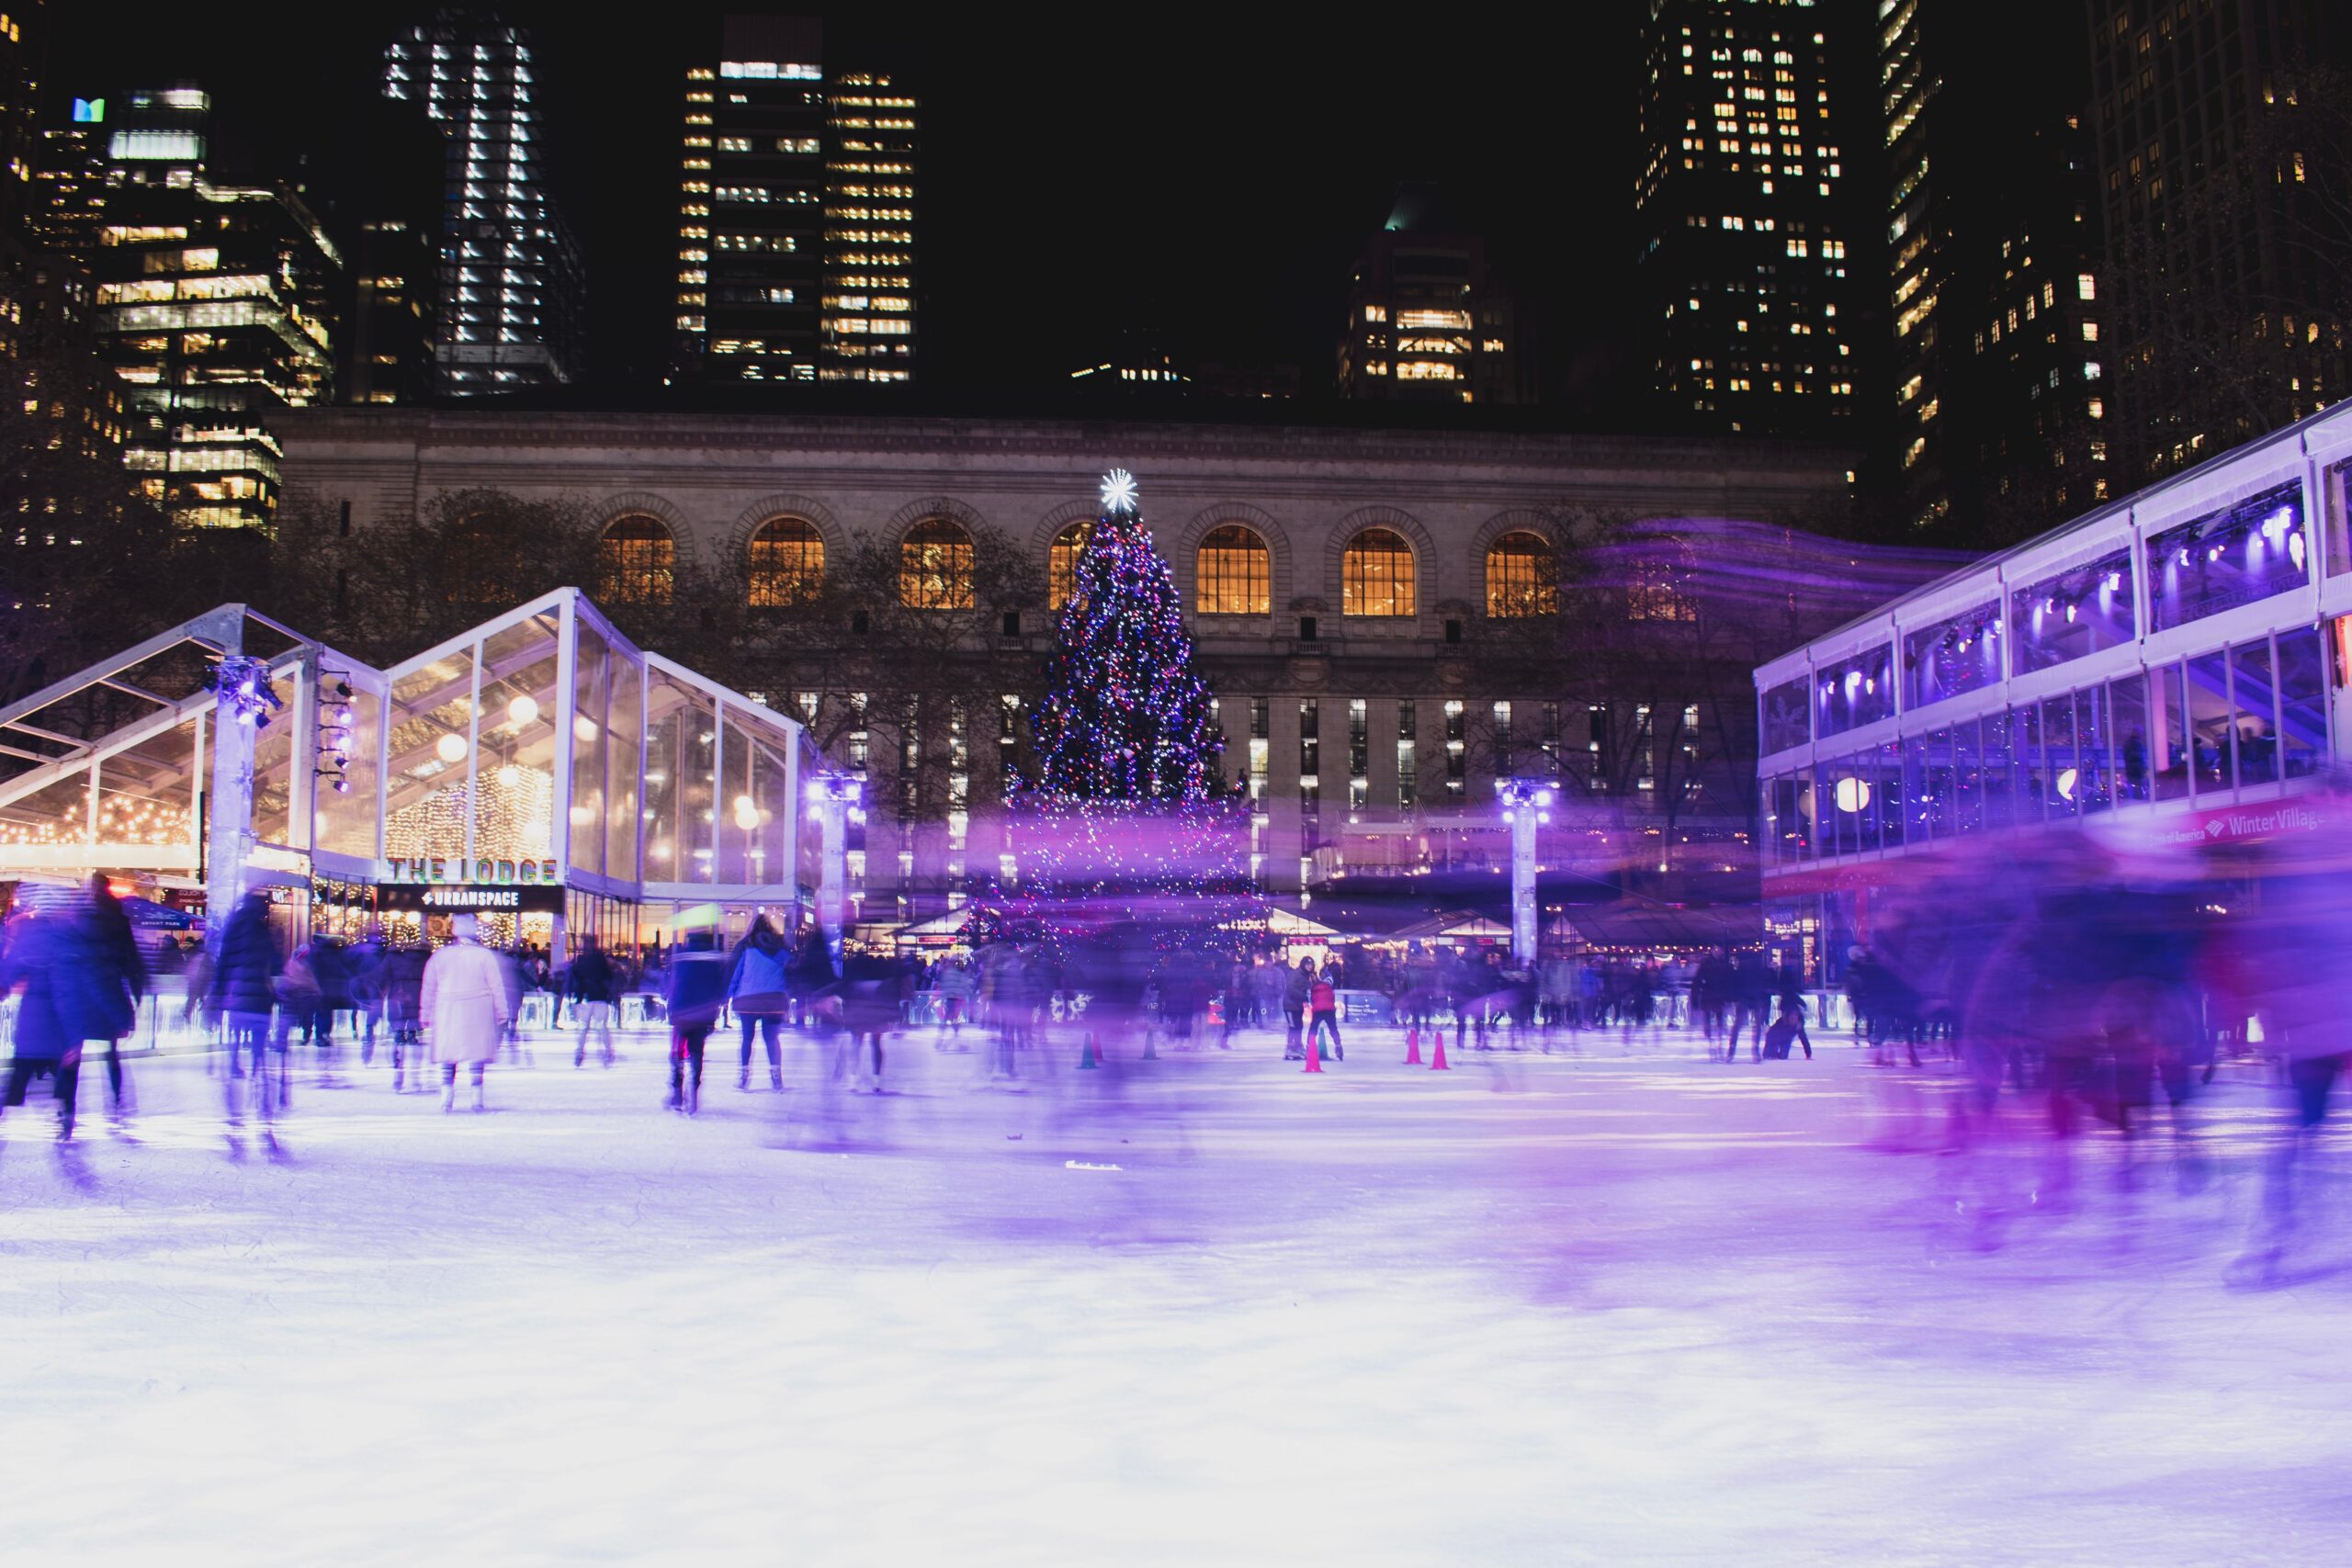 These are the most festive activities to do in NYC during Christmas time. 
Pictured: a skating rink with passing skaters and twinkling Christmas lights 